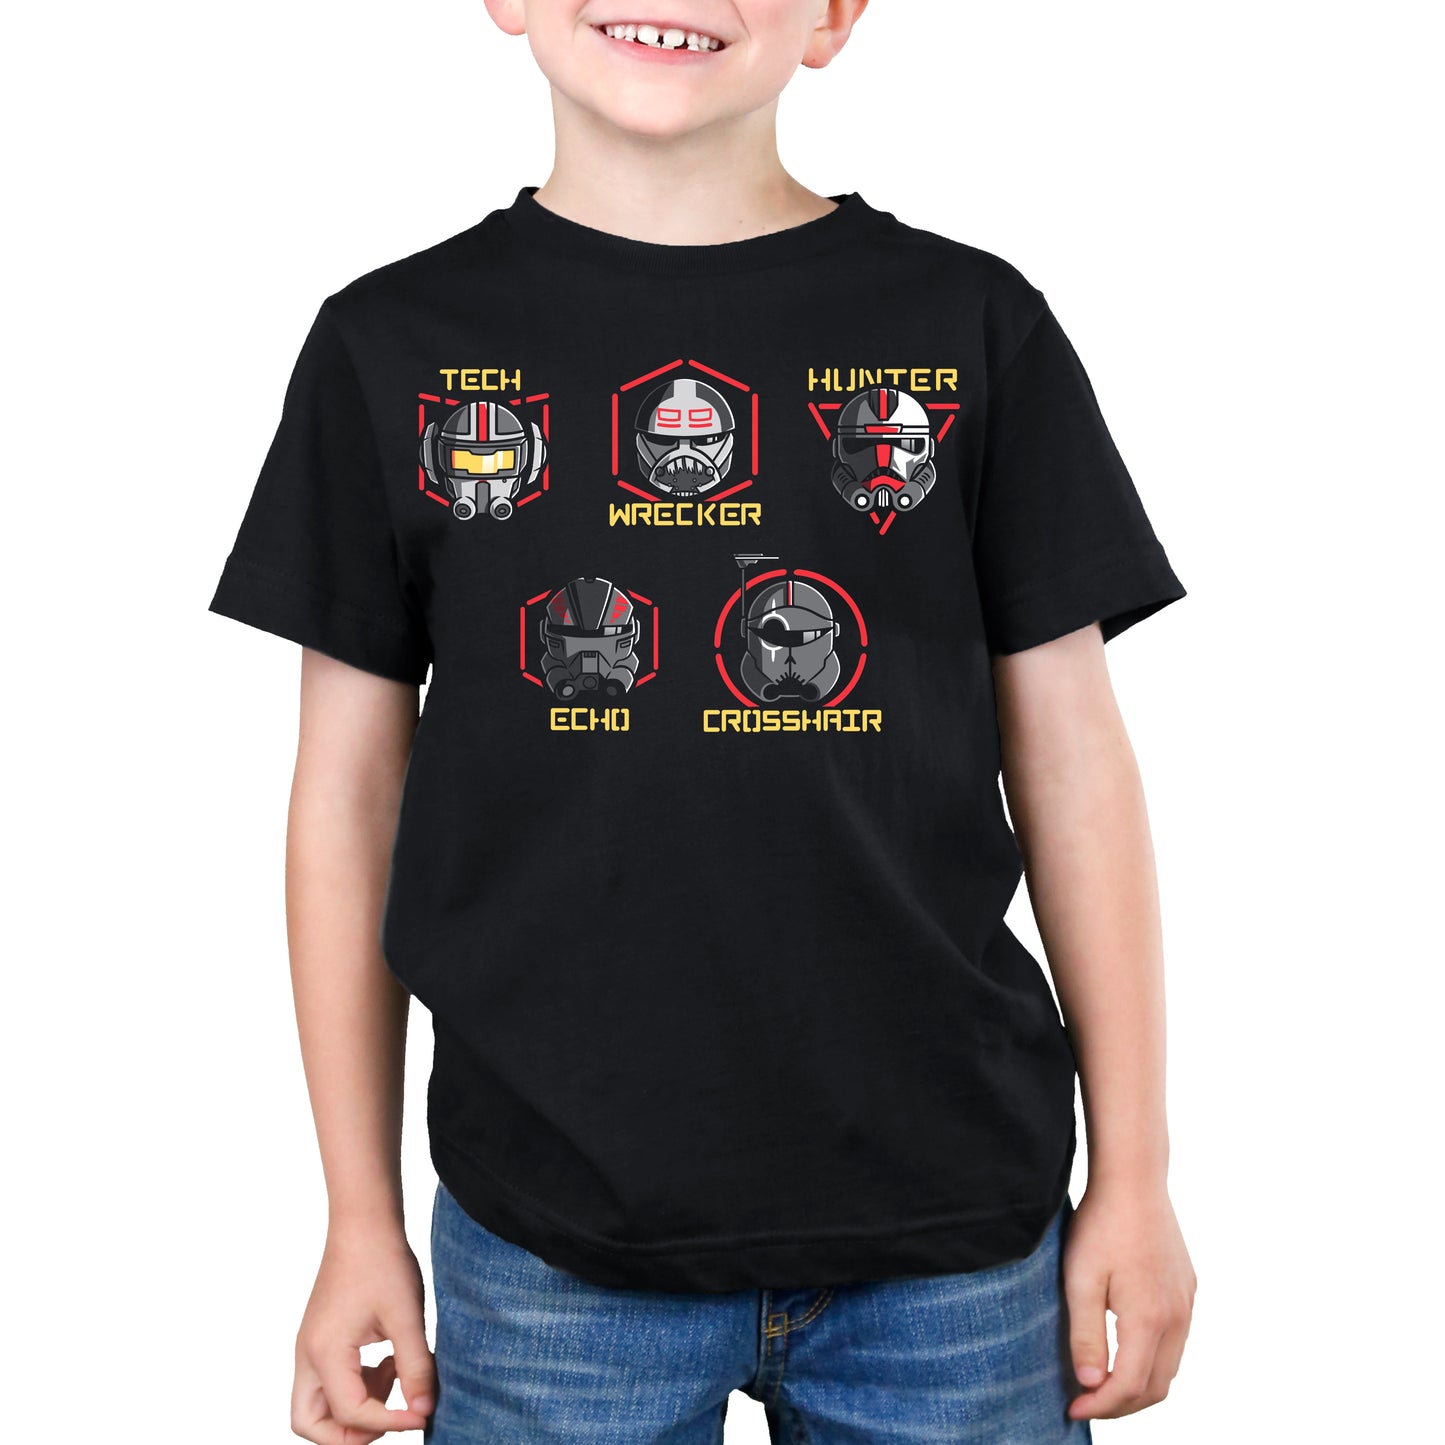 A young boy wearing an officially licensed Star Wars Bad Batch Helmets t-shirt.